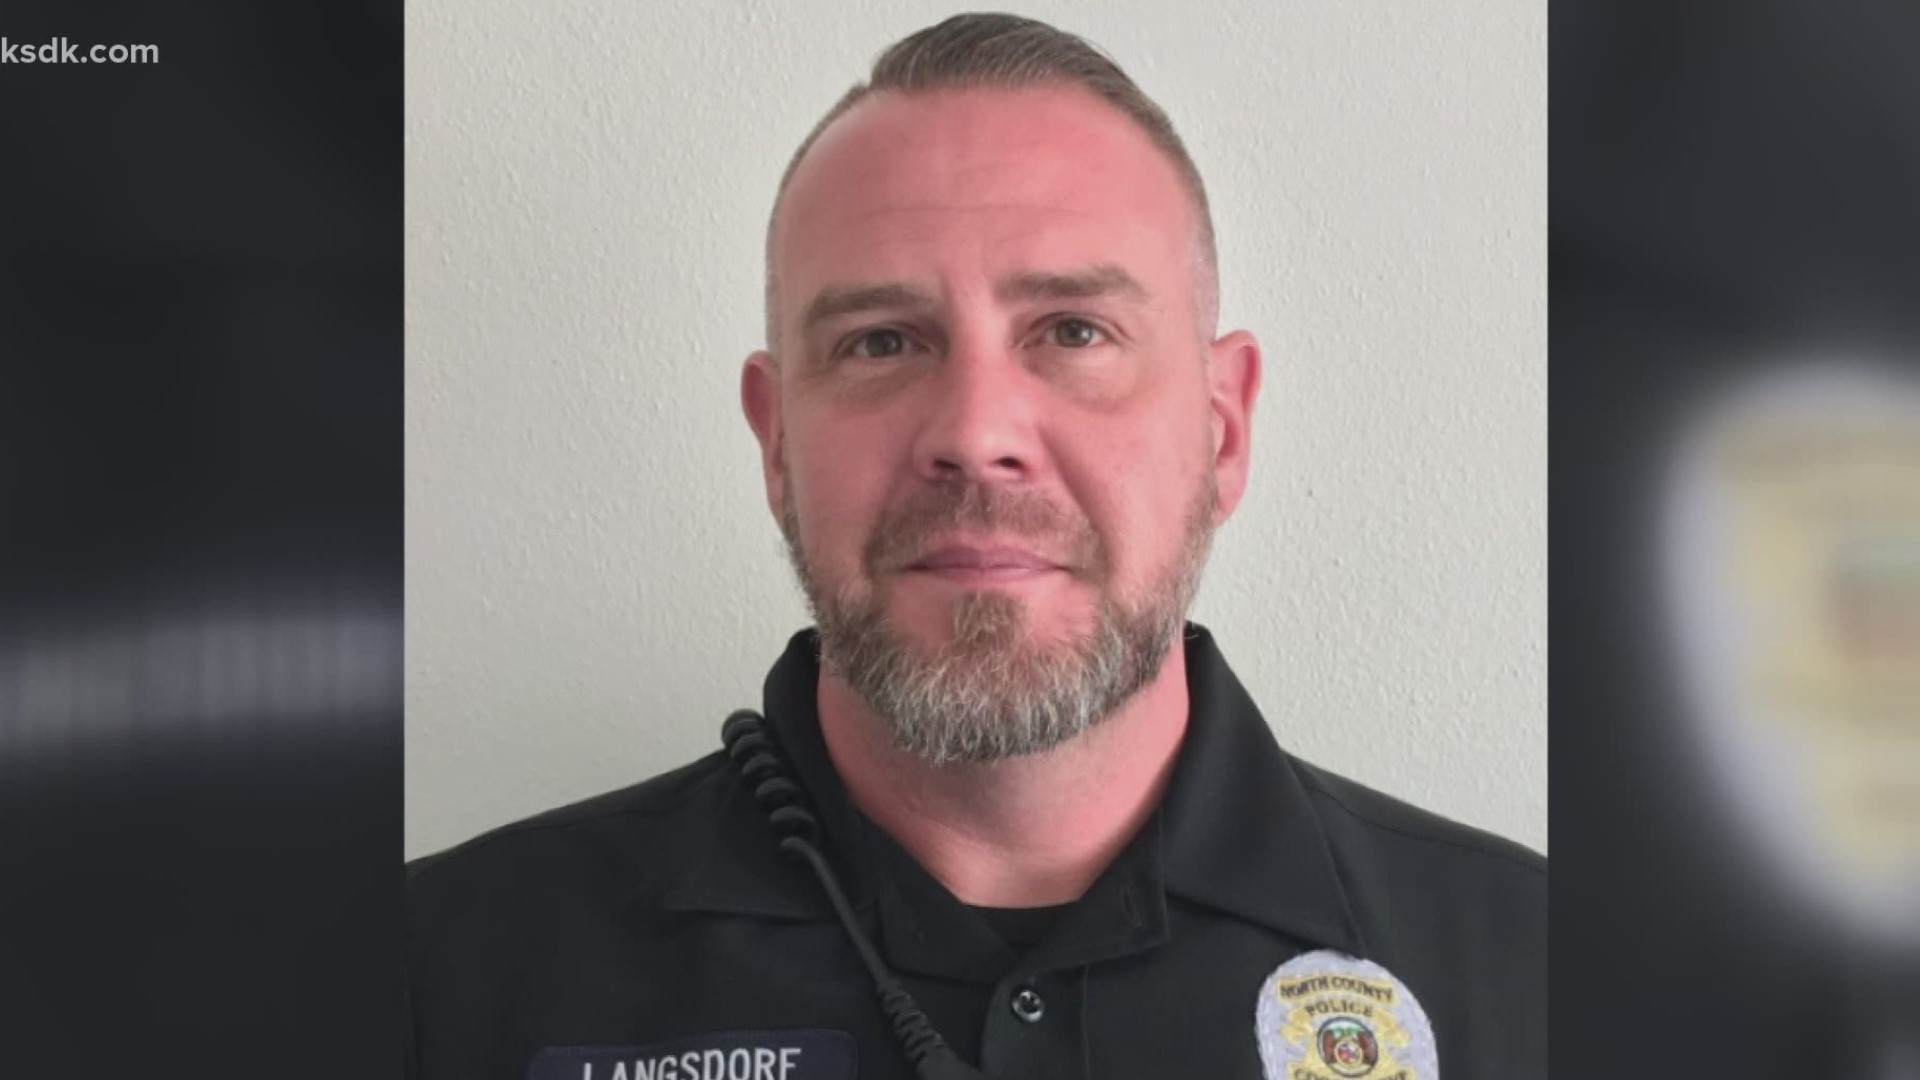 Langsdorf was shot and killed in the line of duty in 2019.